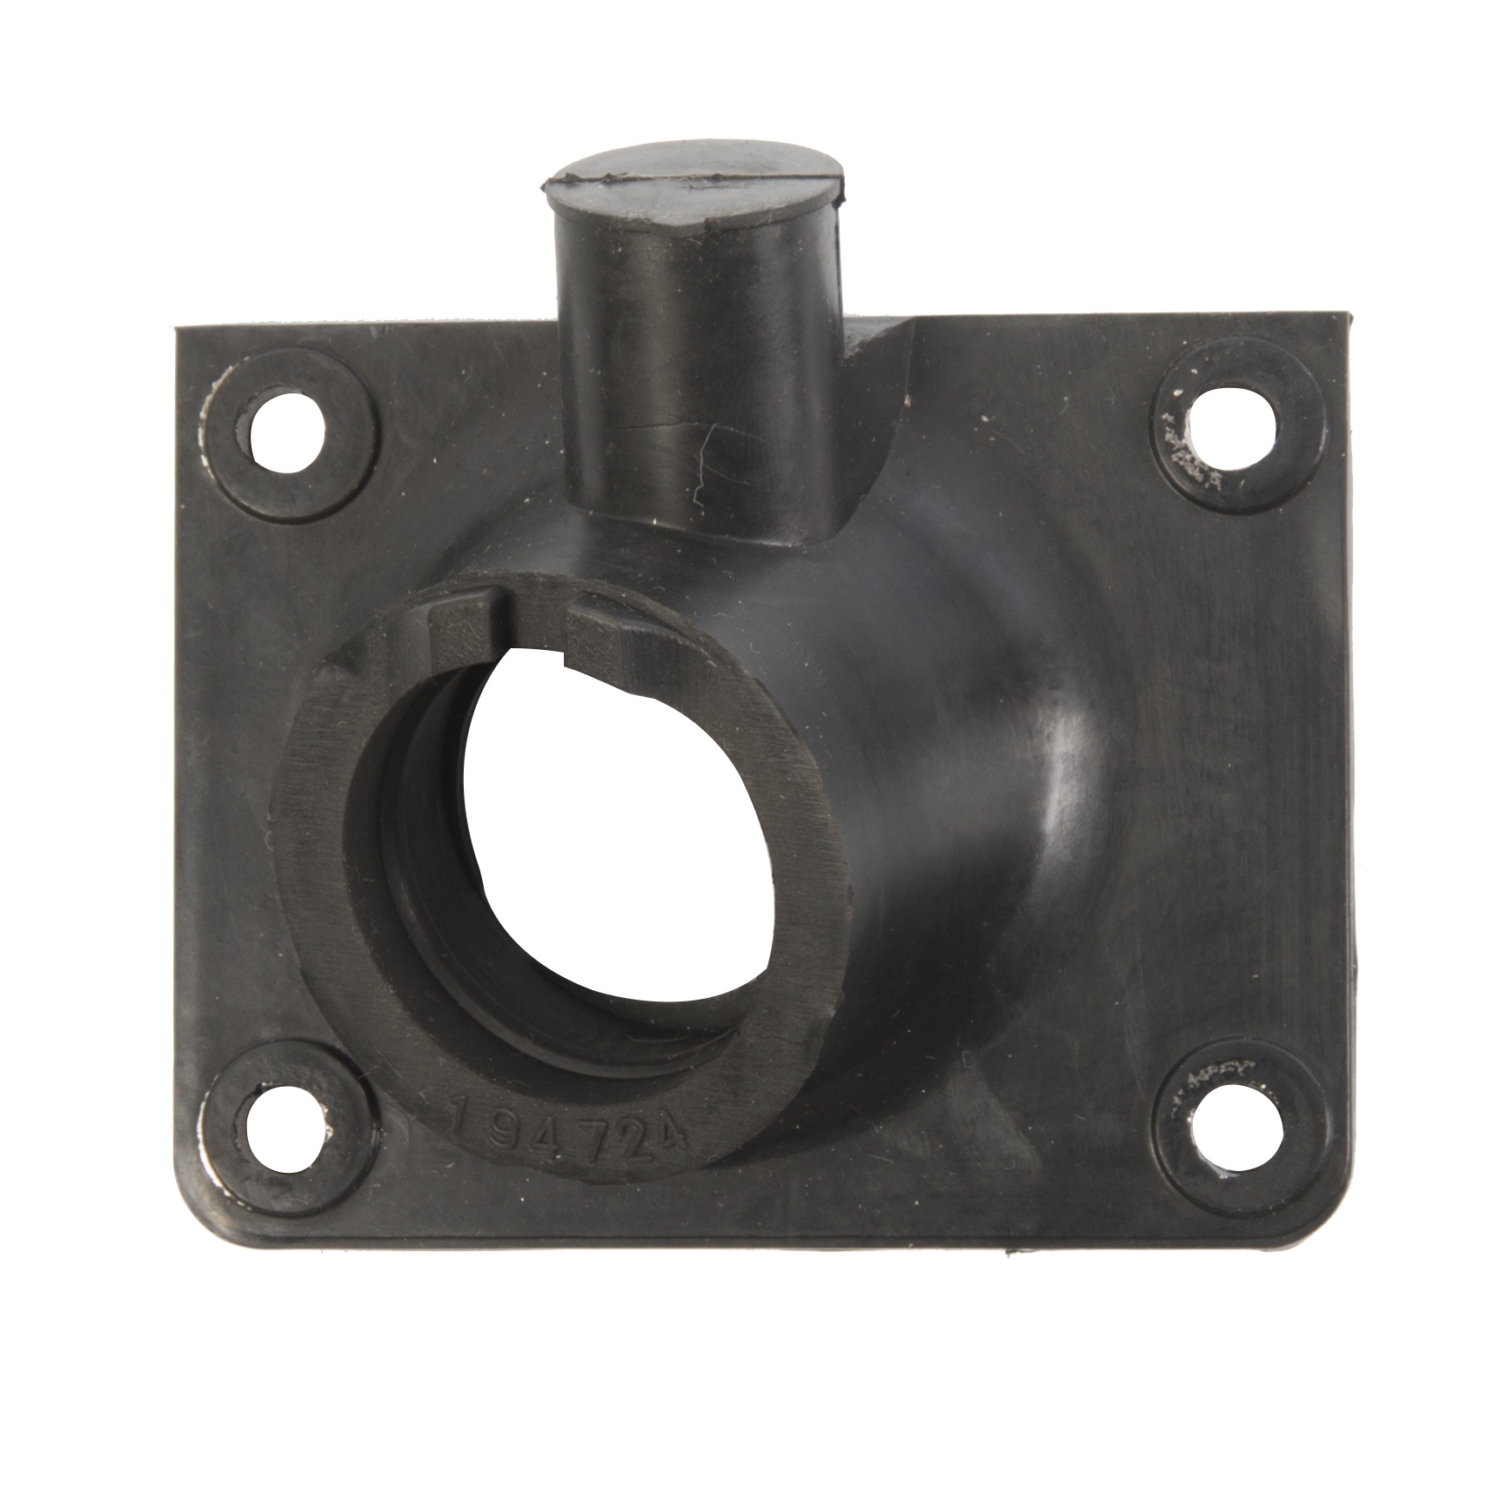 194210 Kimpex Carb Mounting Flange